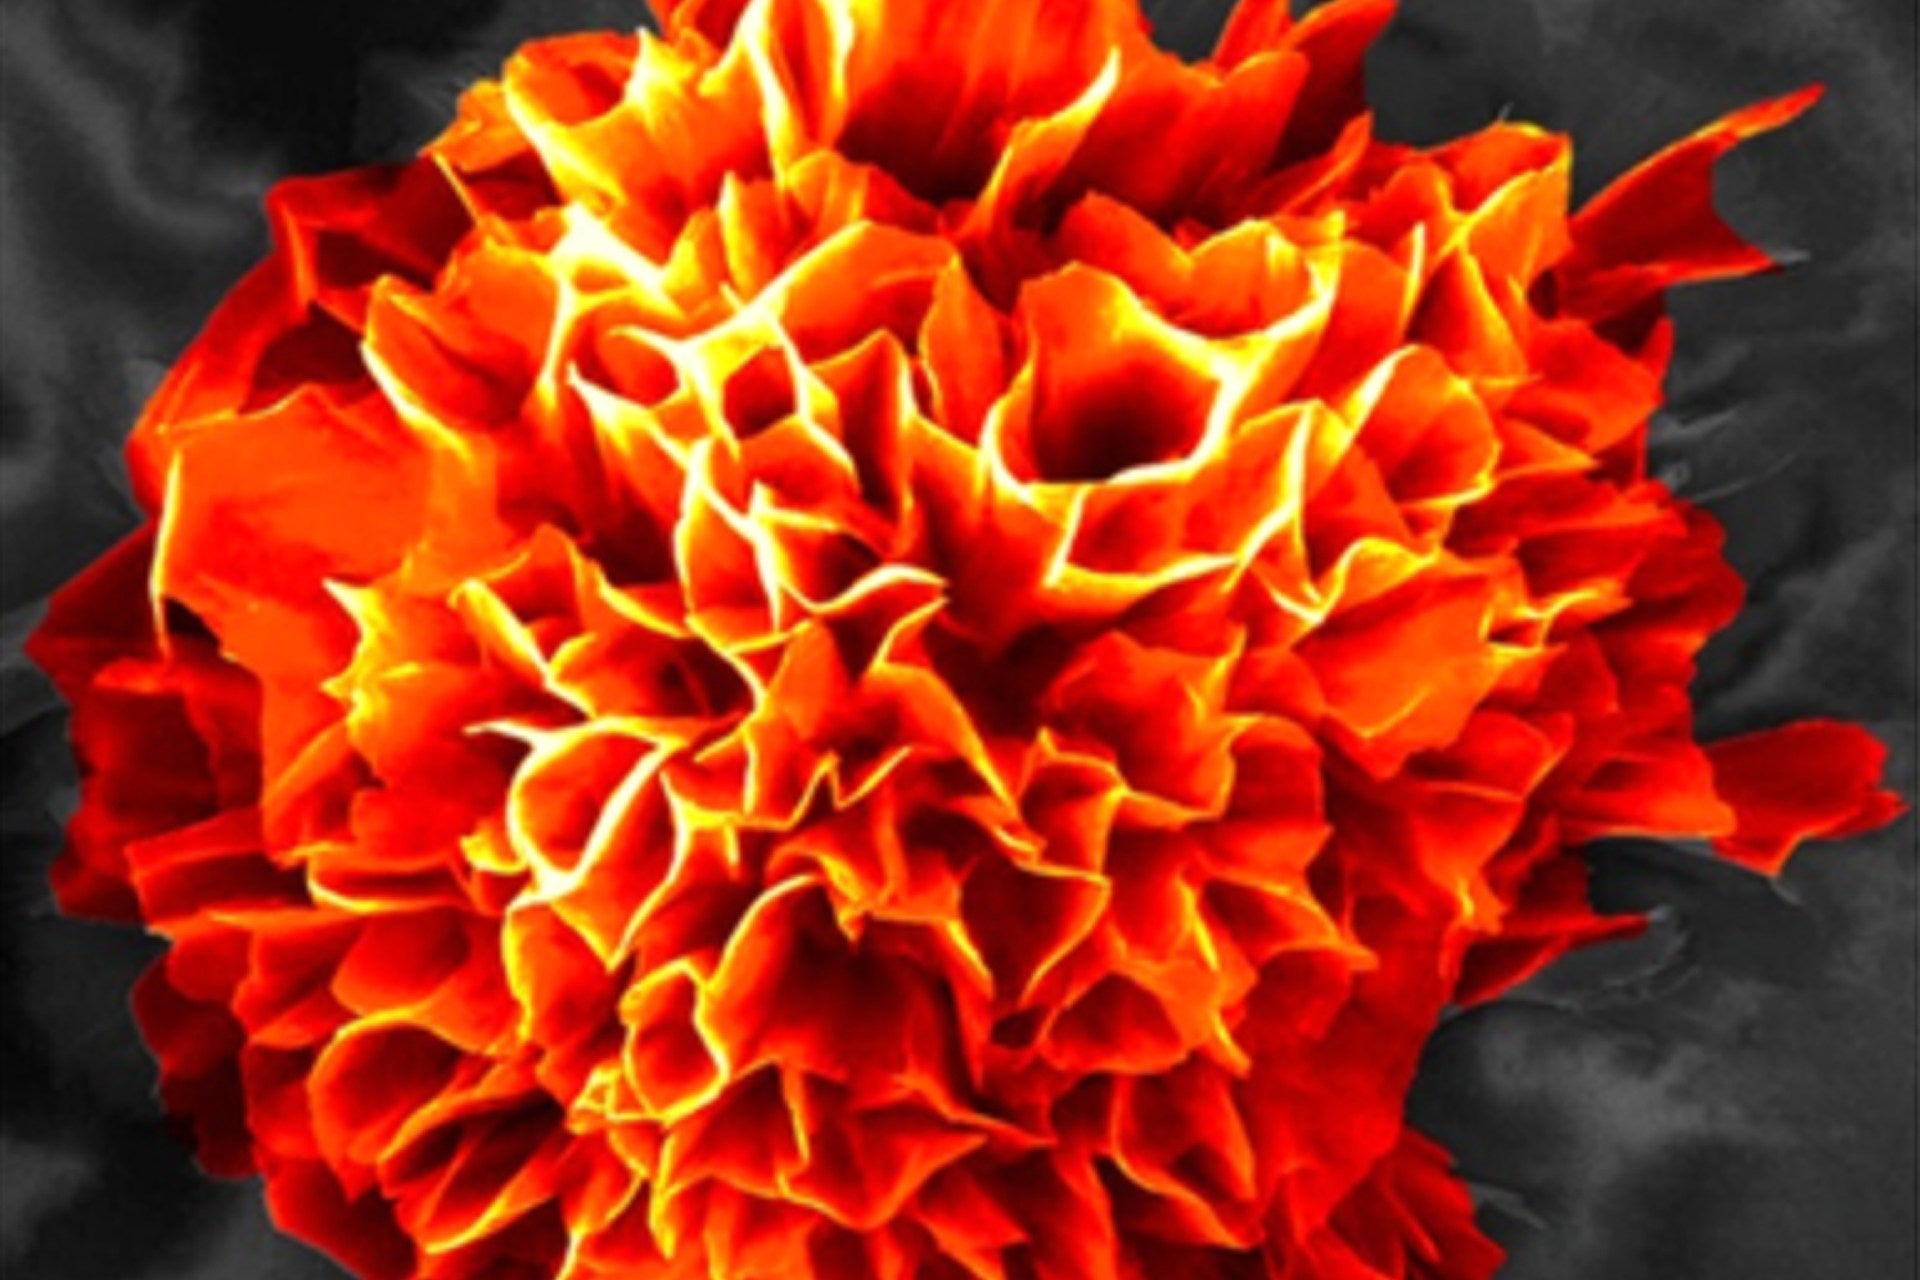 One of the microflowers created by the researchers, digitally coloured and magnified 20,000 times